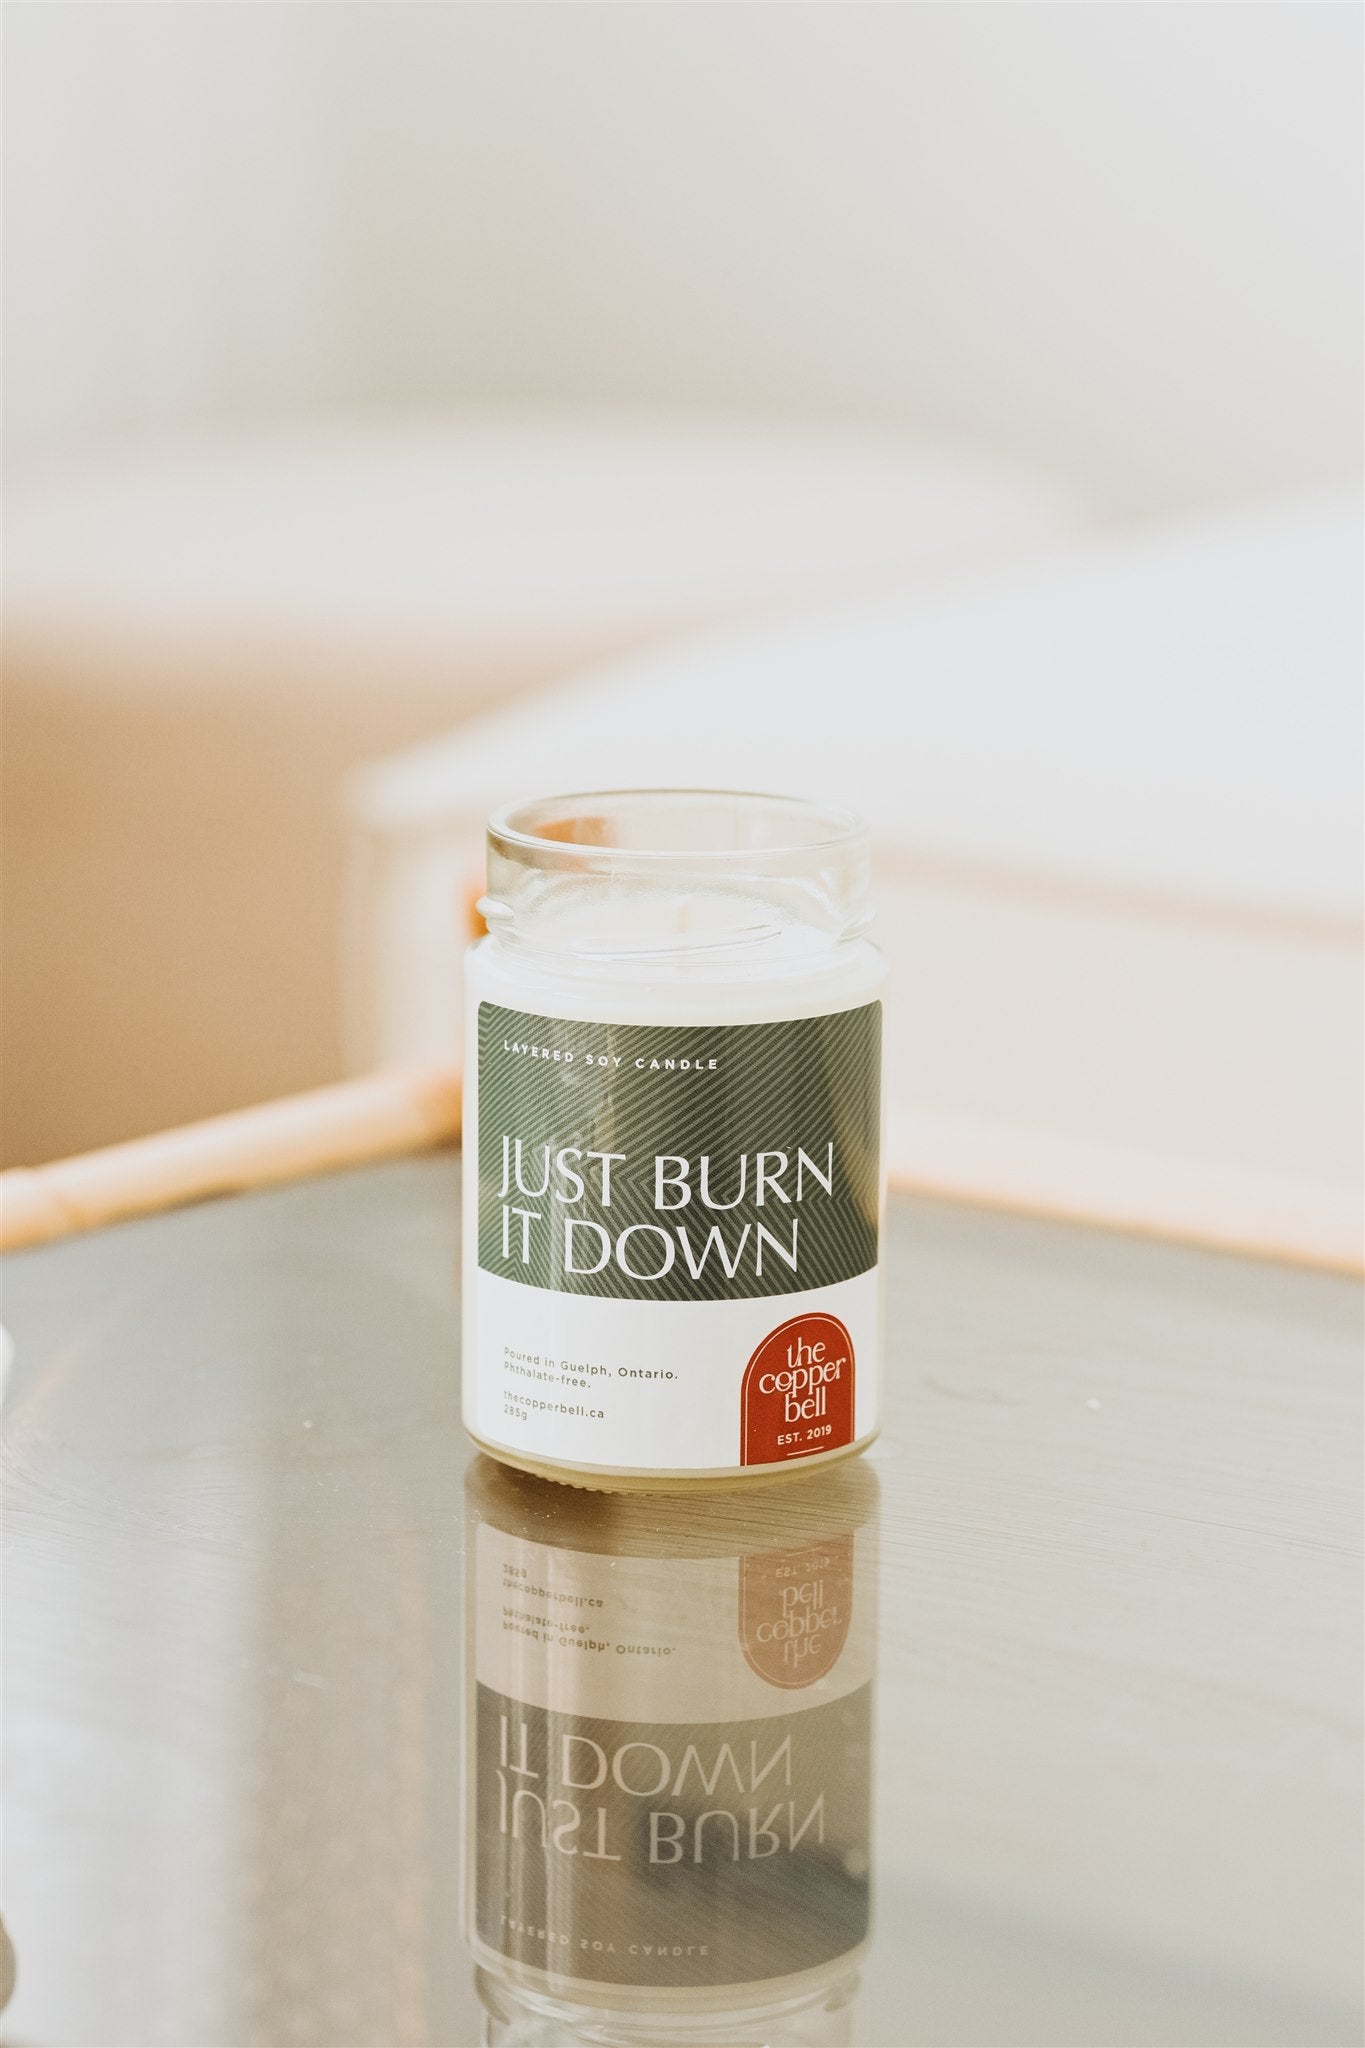 just burn it down soy candle. layered candle displayed on a glass table top, the label reads just burn it down